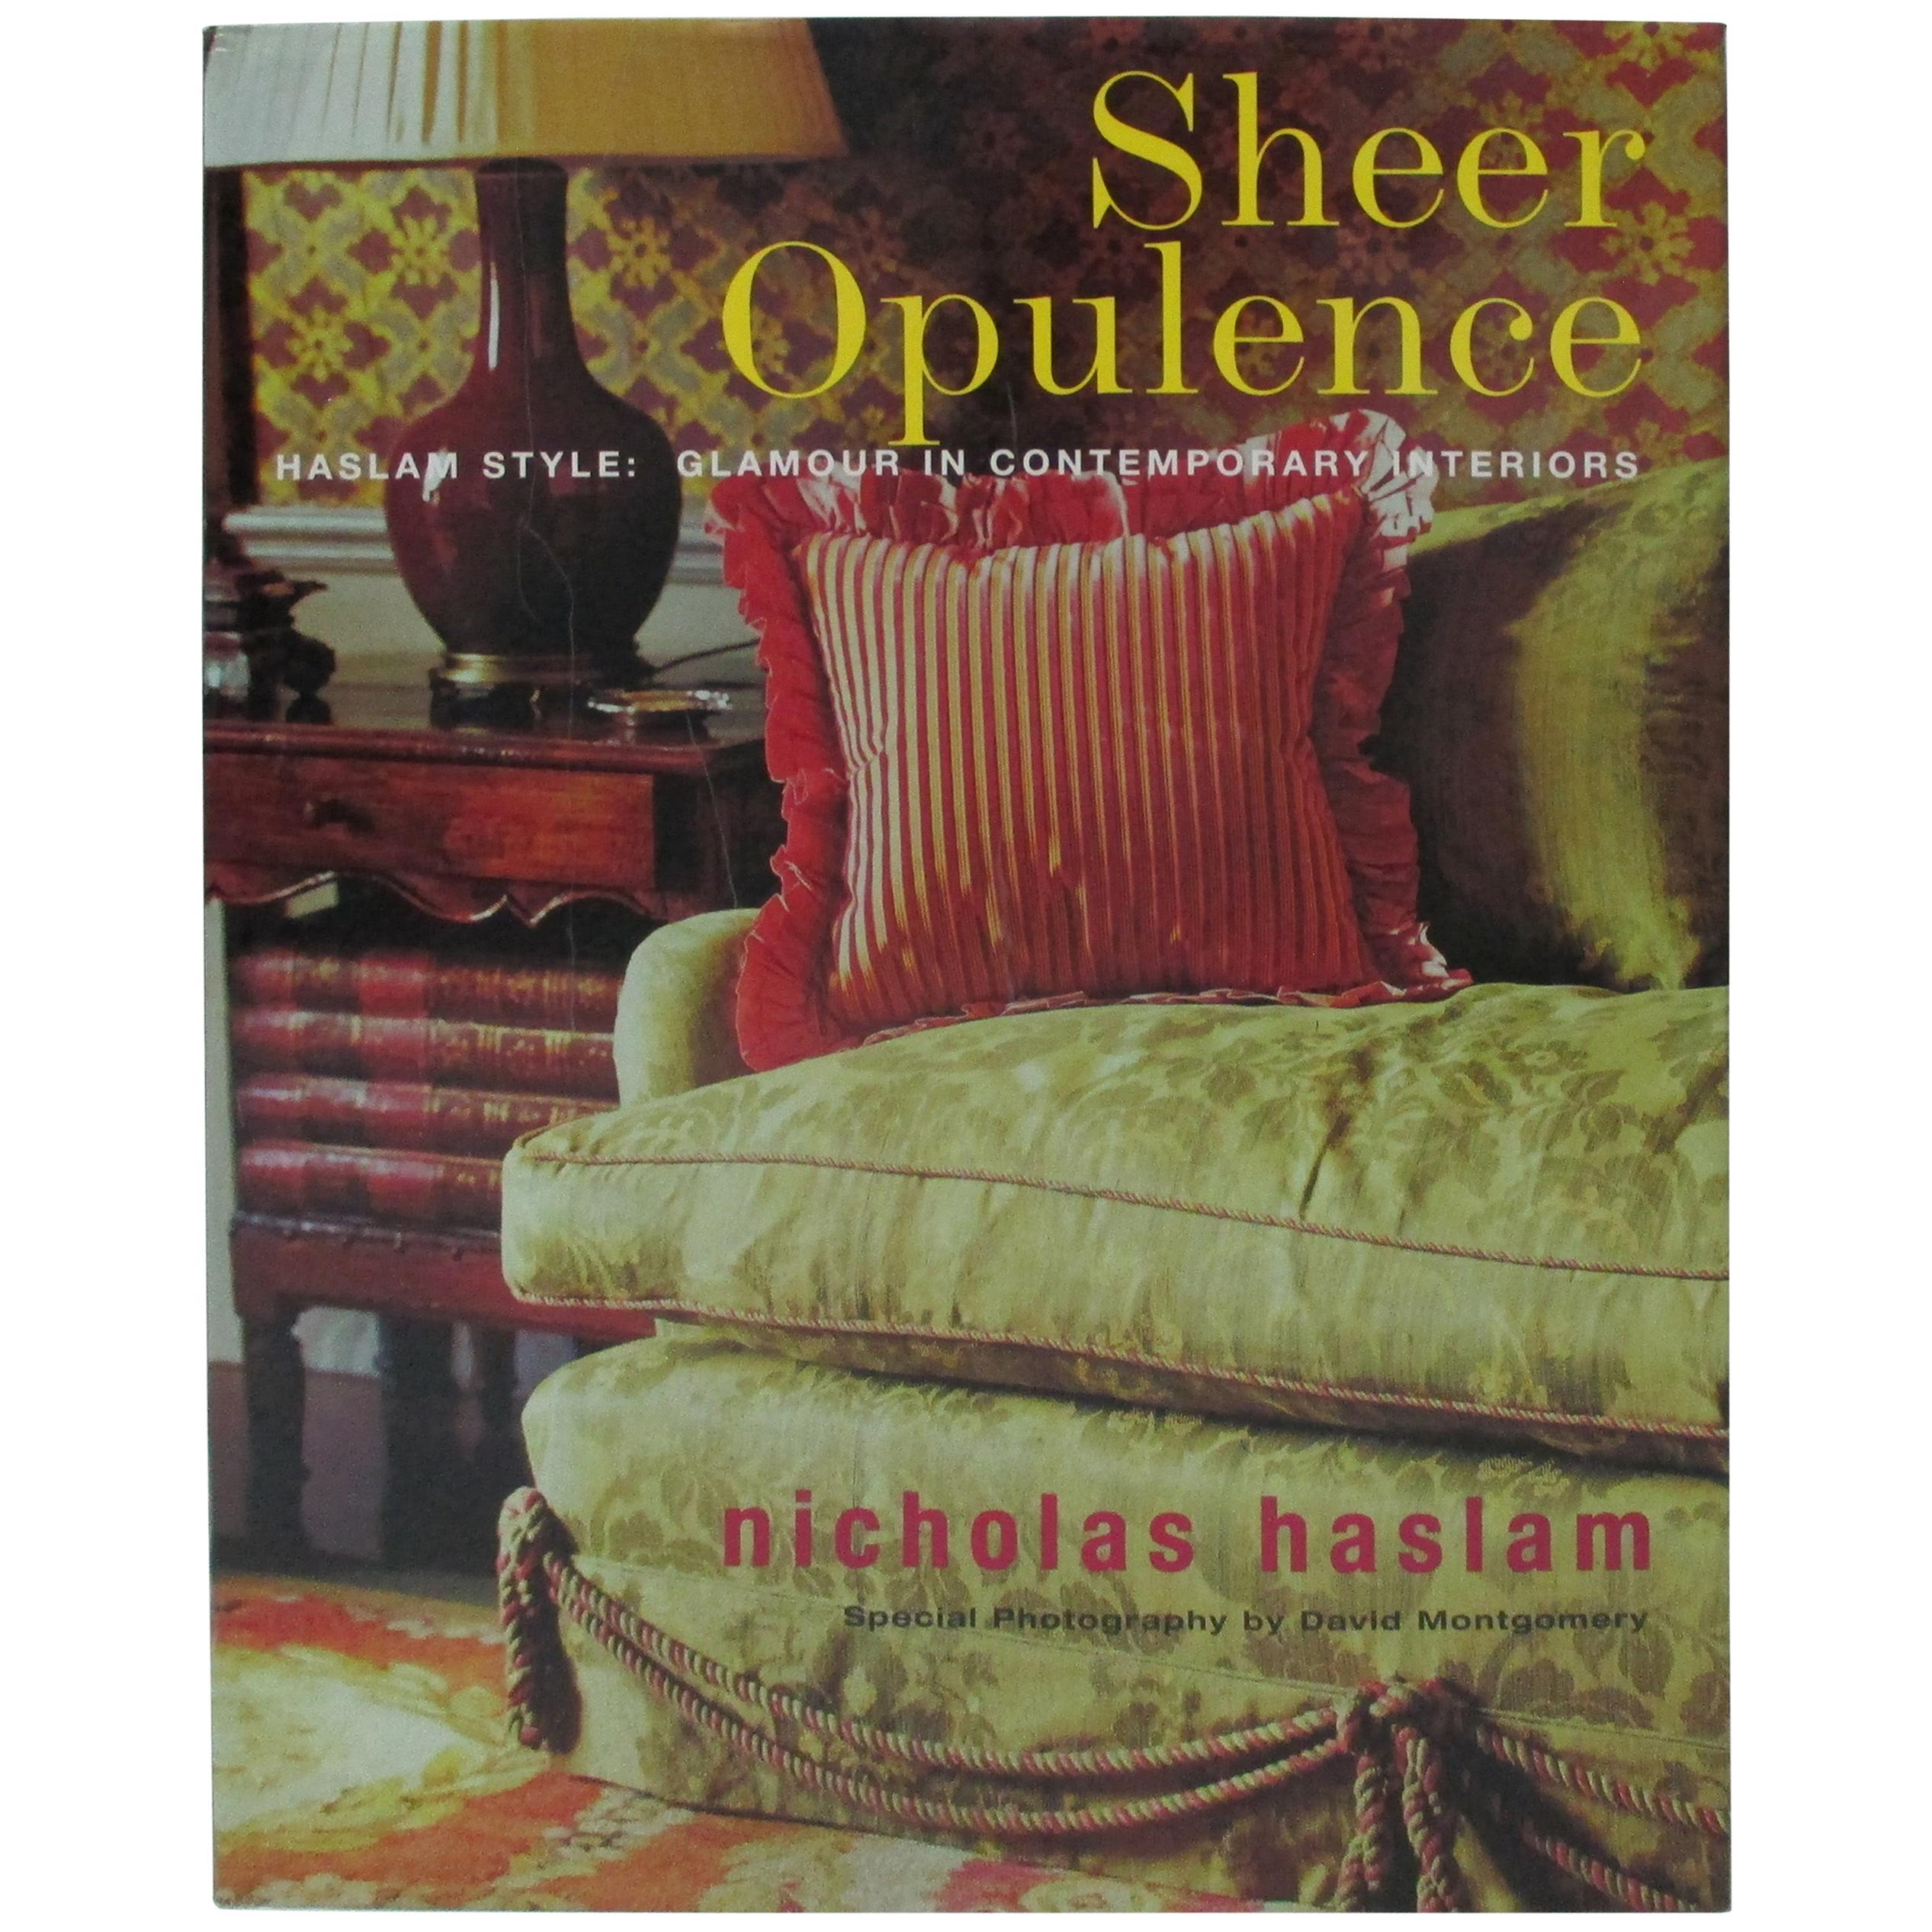 Sheer Opulence Hardcover Decoration Book by Nicholas Haslam